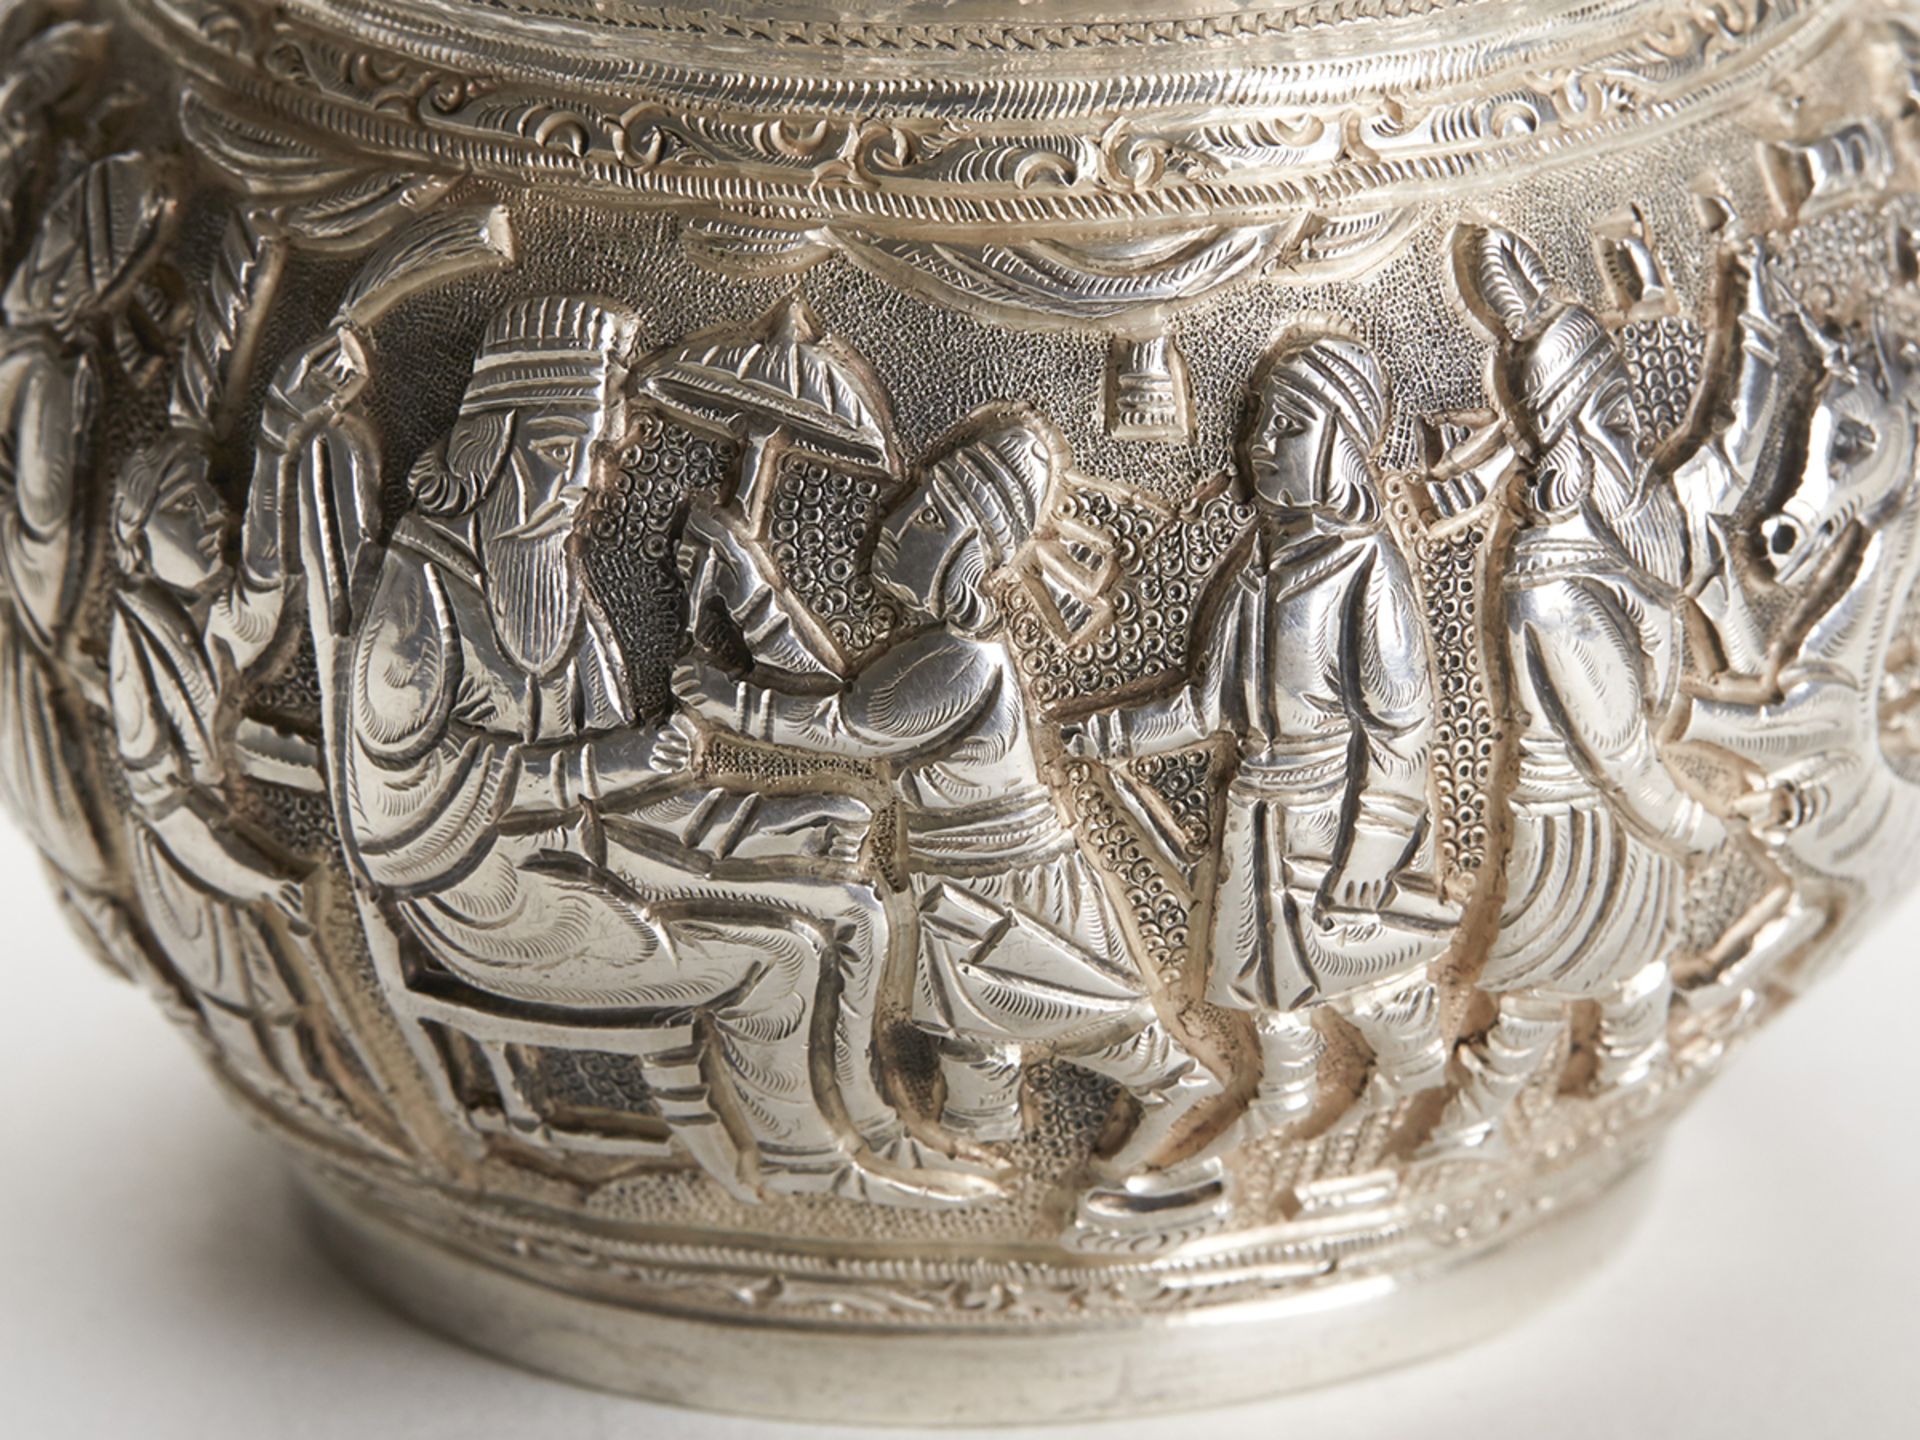 ANTIQUE INDIAN/ASIAN SILVER FIGURAL VASE 19TH C. - Image 2 of 7